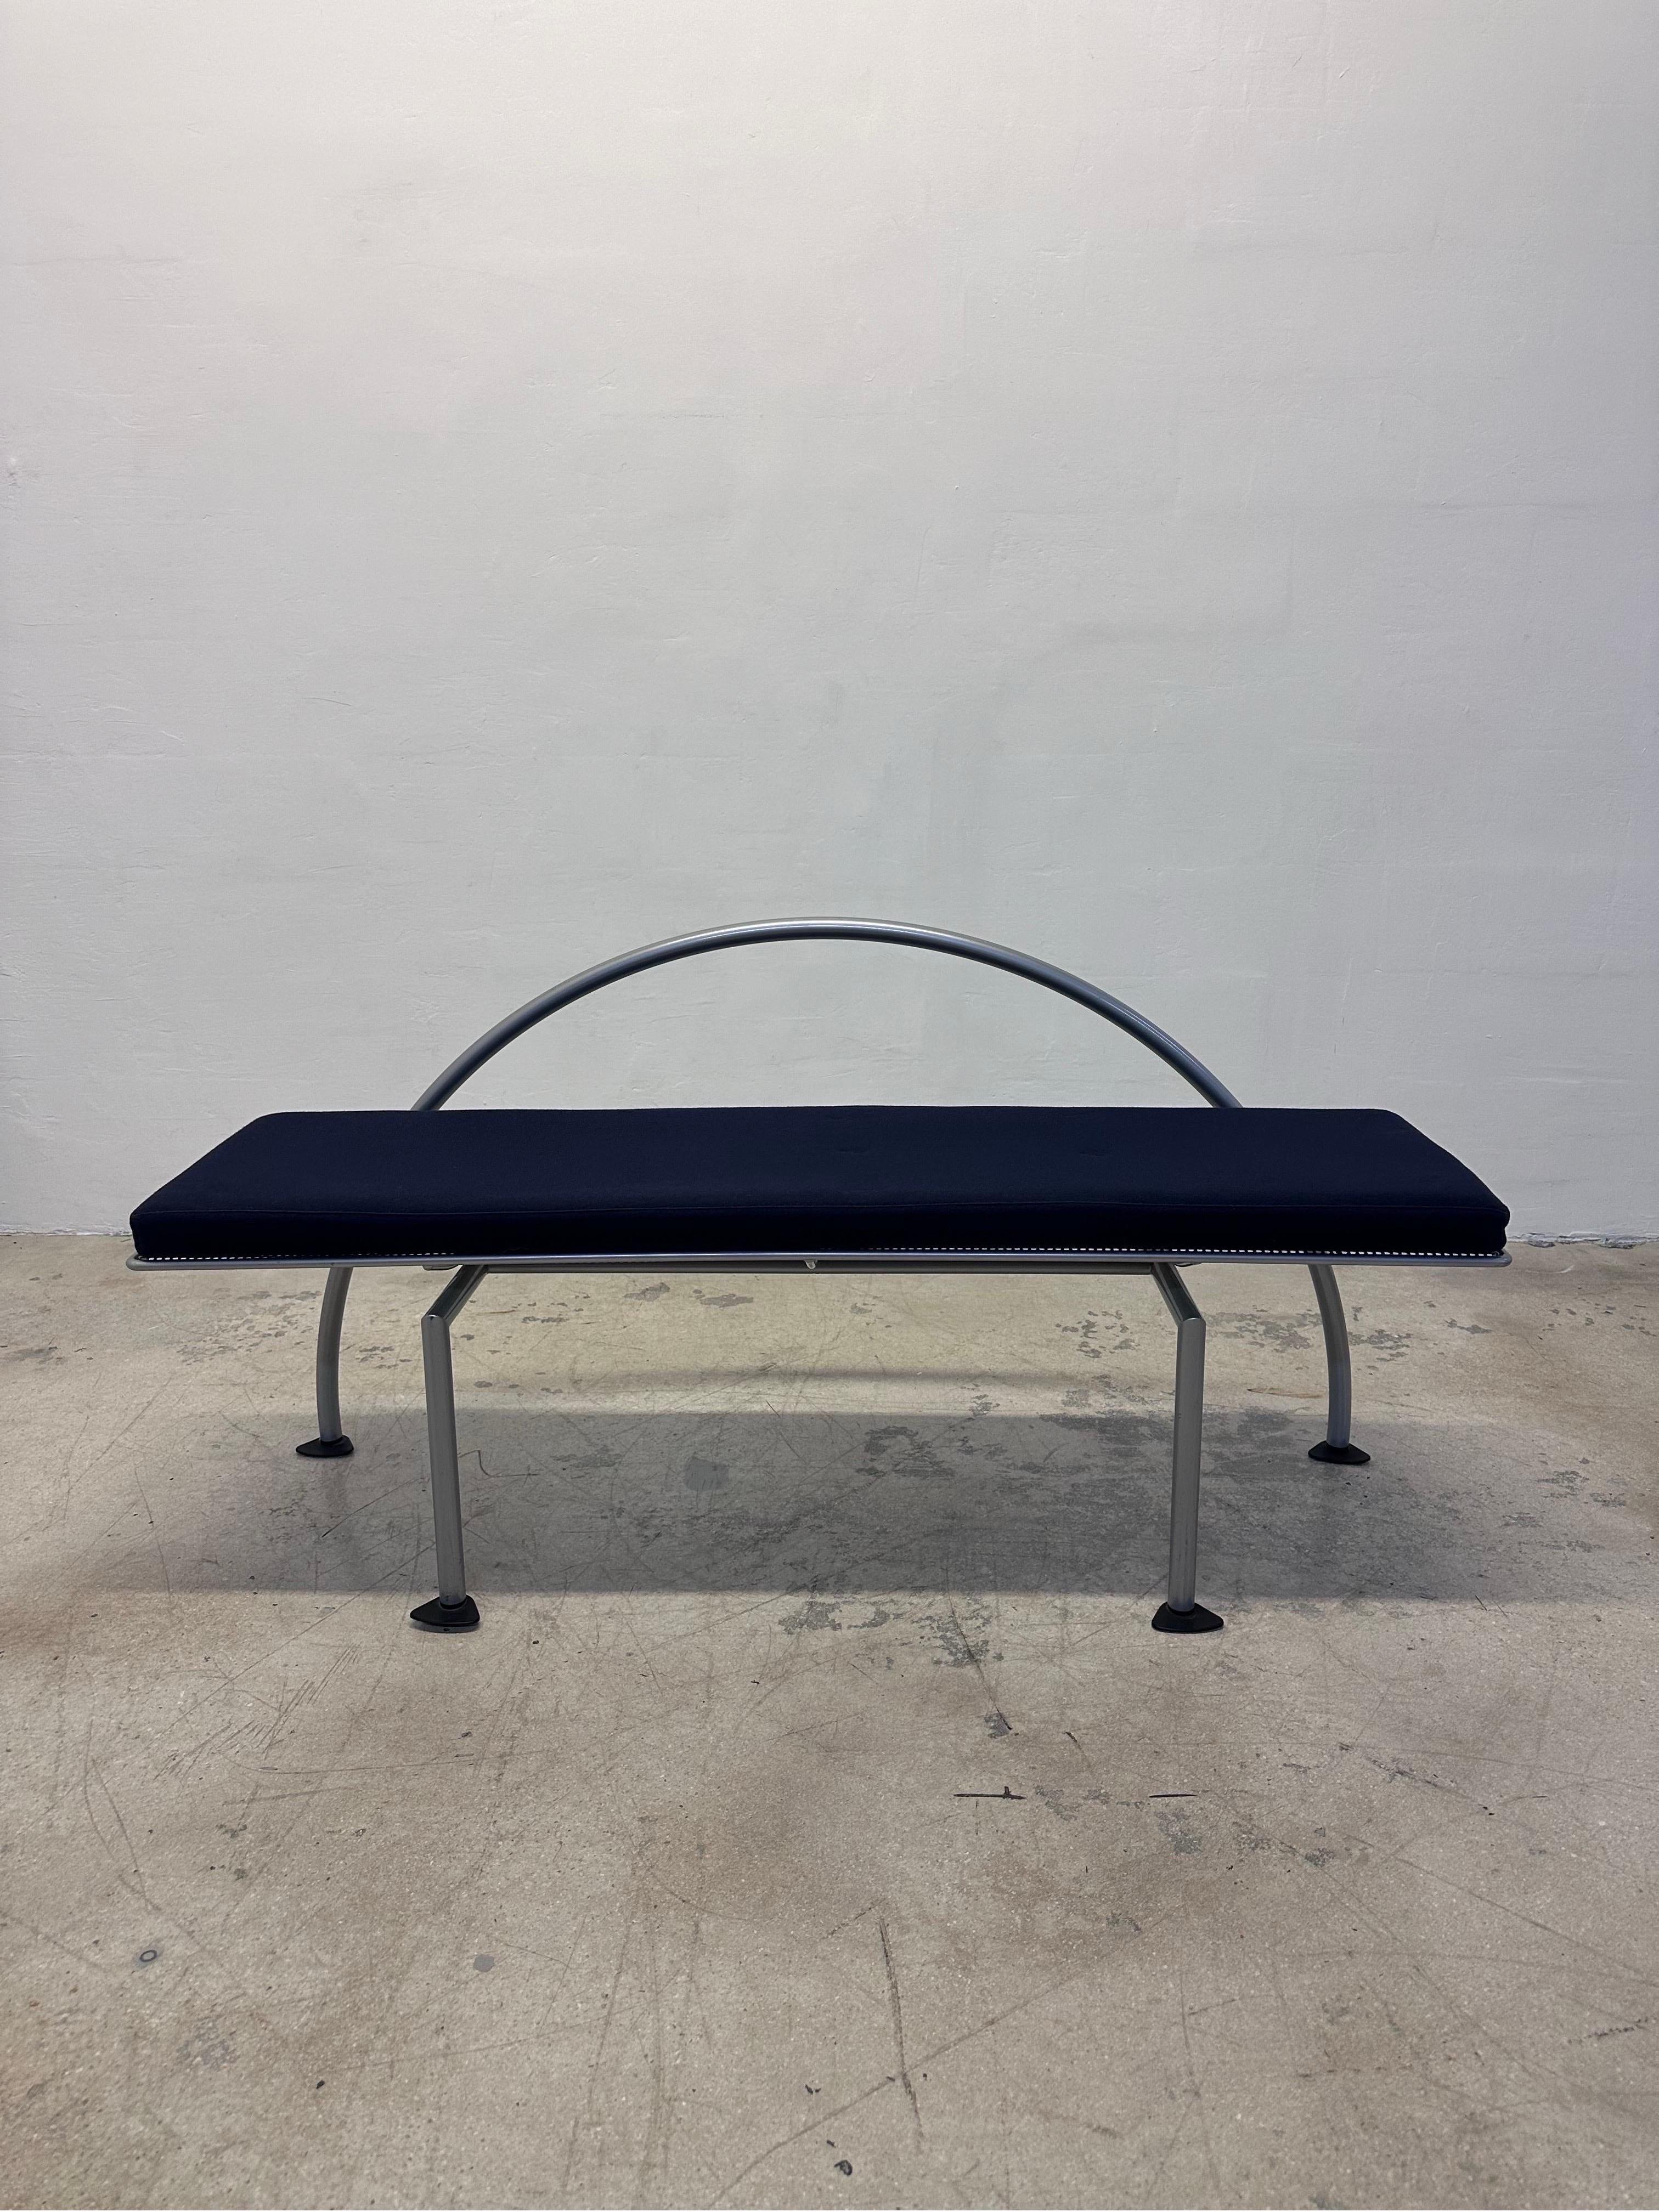 Rare Memphis era Karina bench by Alessandro Mendnini and part of the series Poesie d’Anticamera. Grey epoxy steel tube, perforated steel seat with blue felt cushion. Italy 1980s.